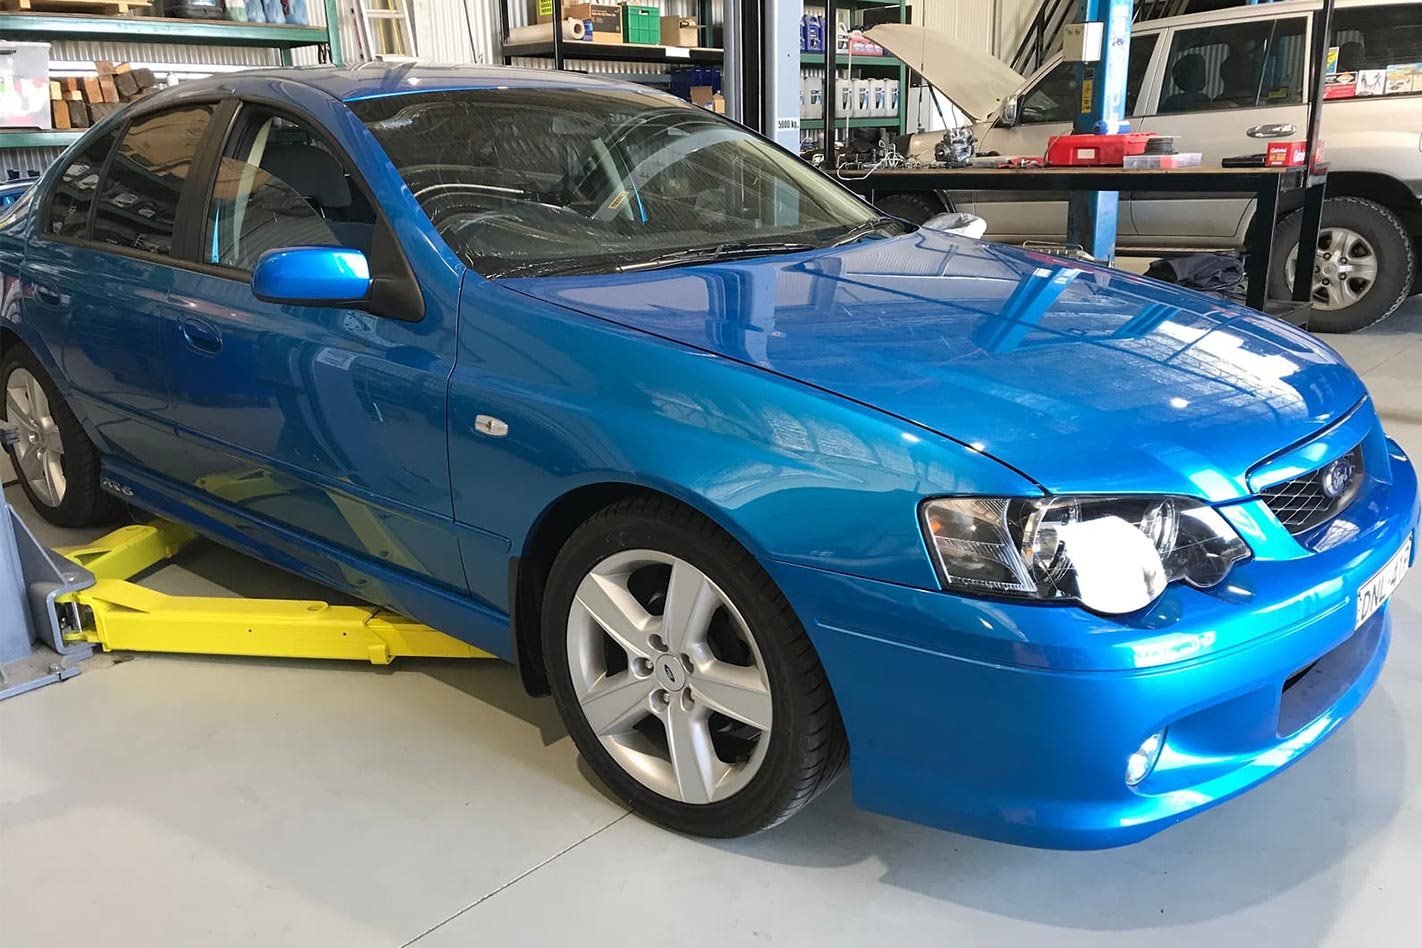 Near New Ford Falcon Xr6 Turbo For Sale